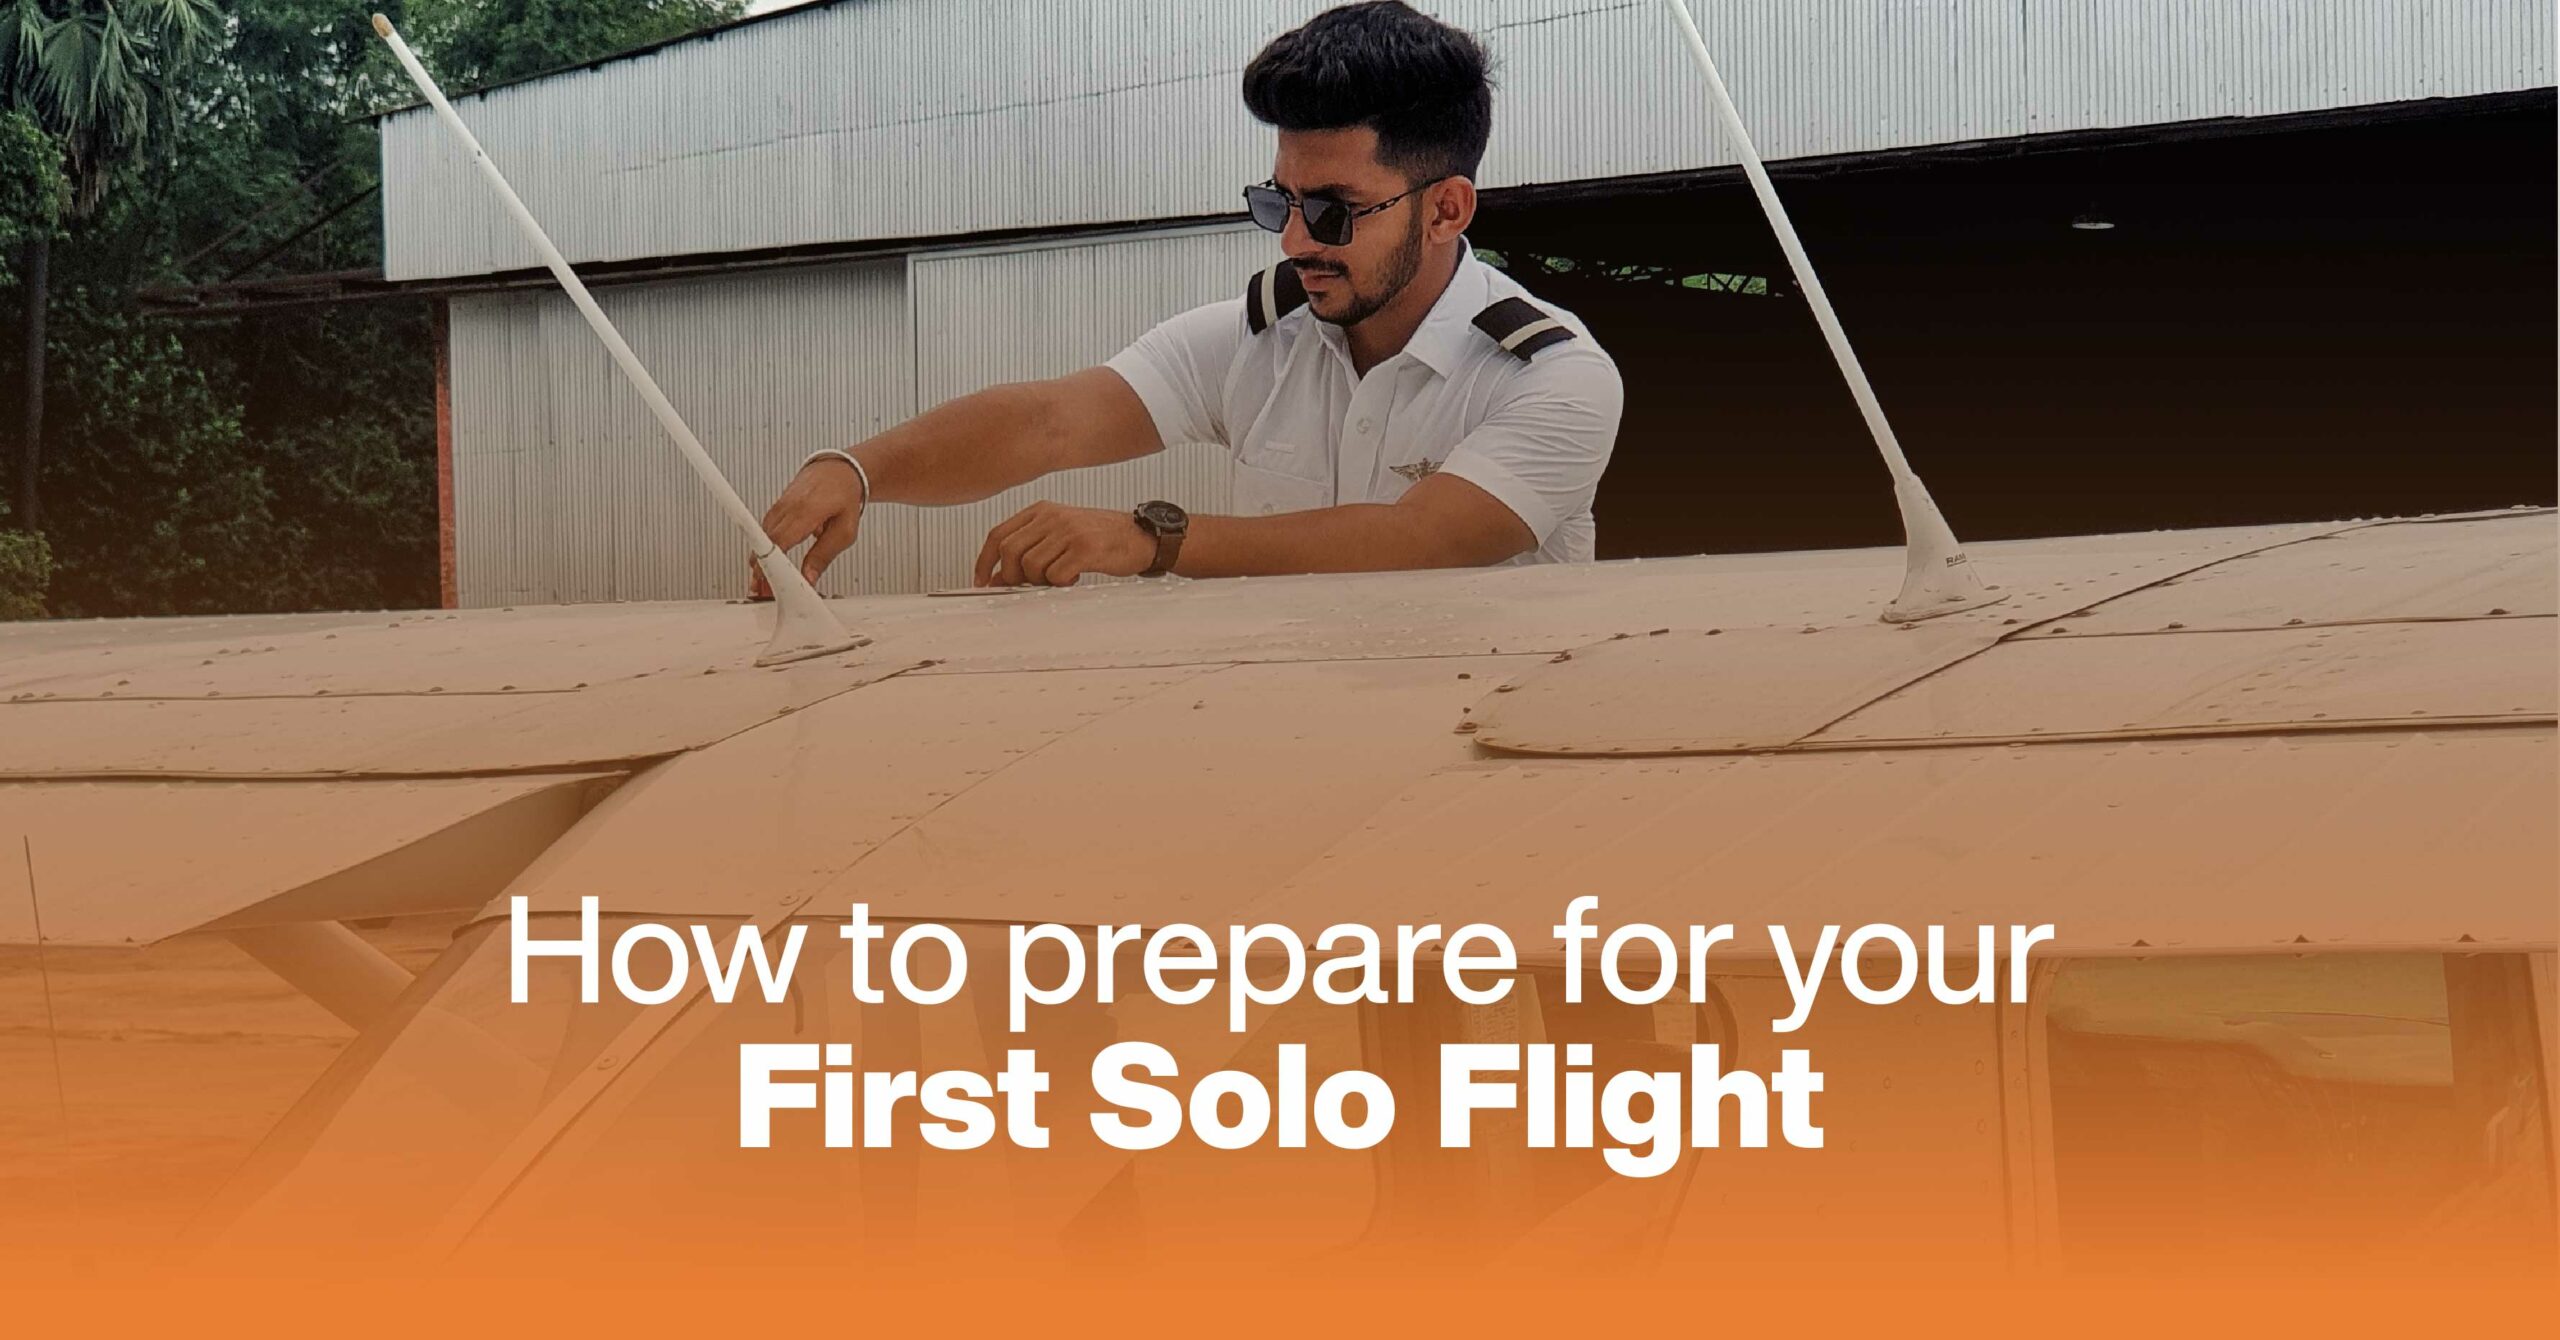 How To Prepare For Your First Solo Flight